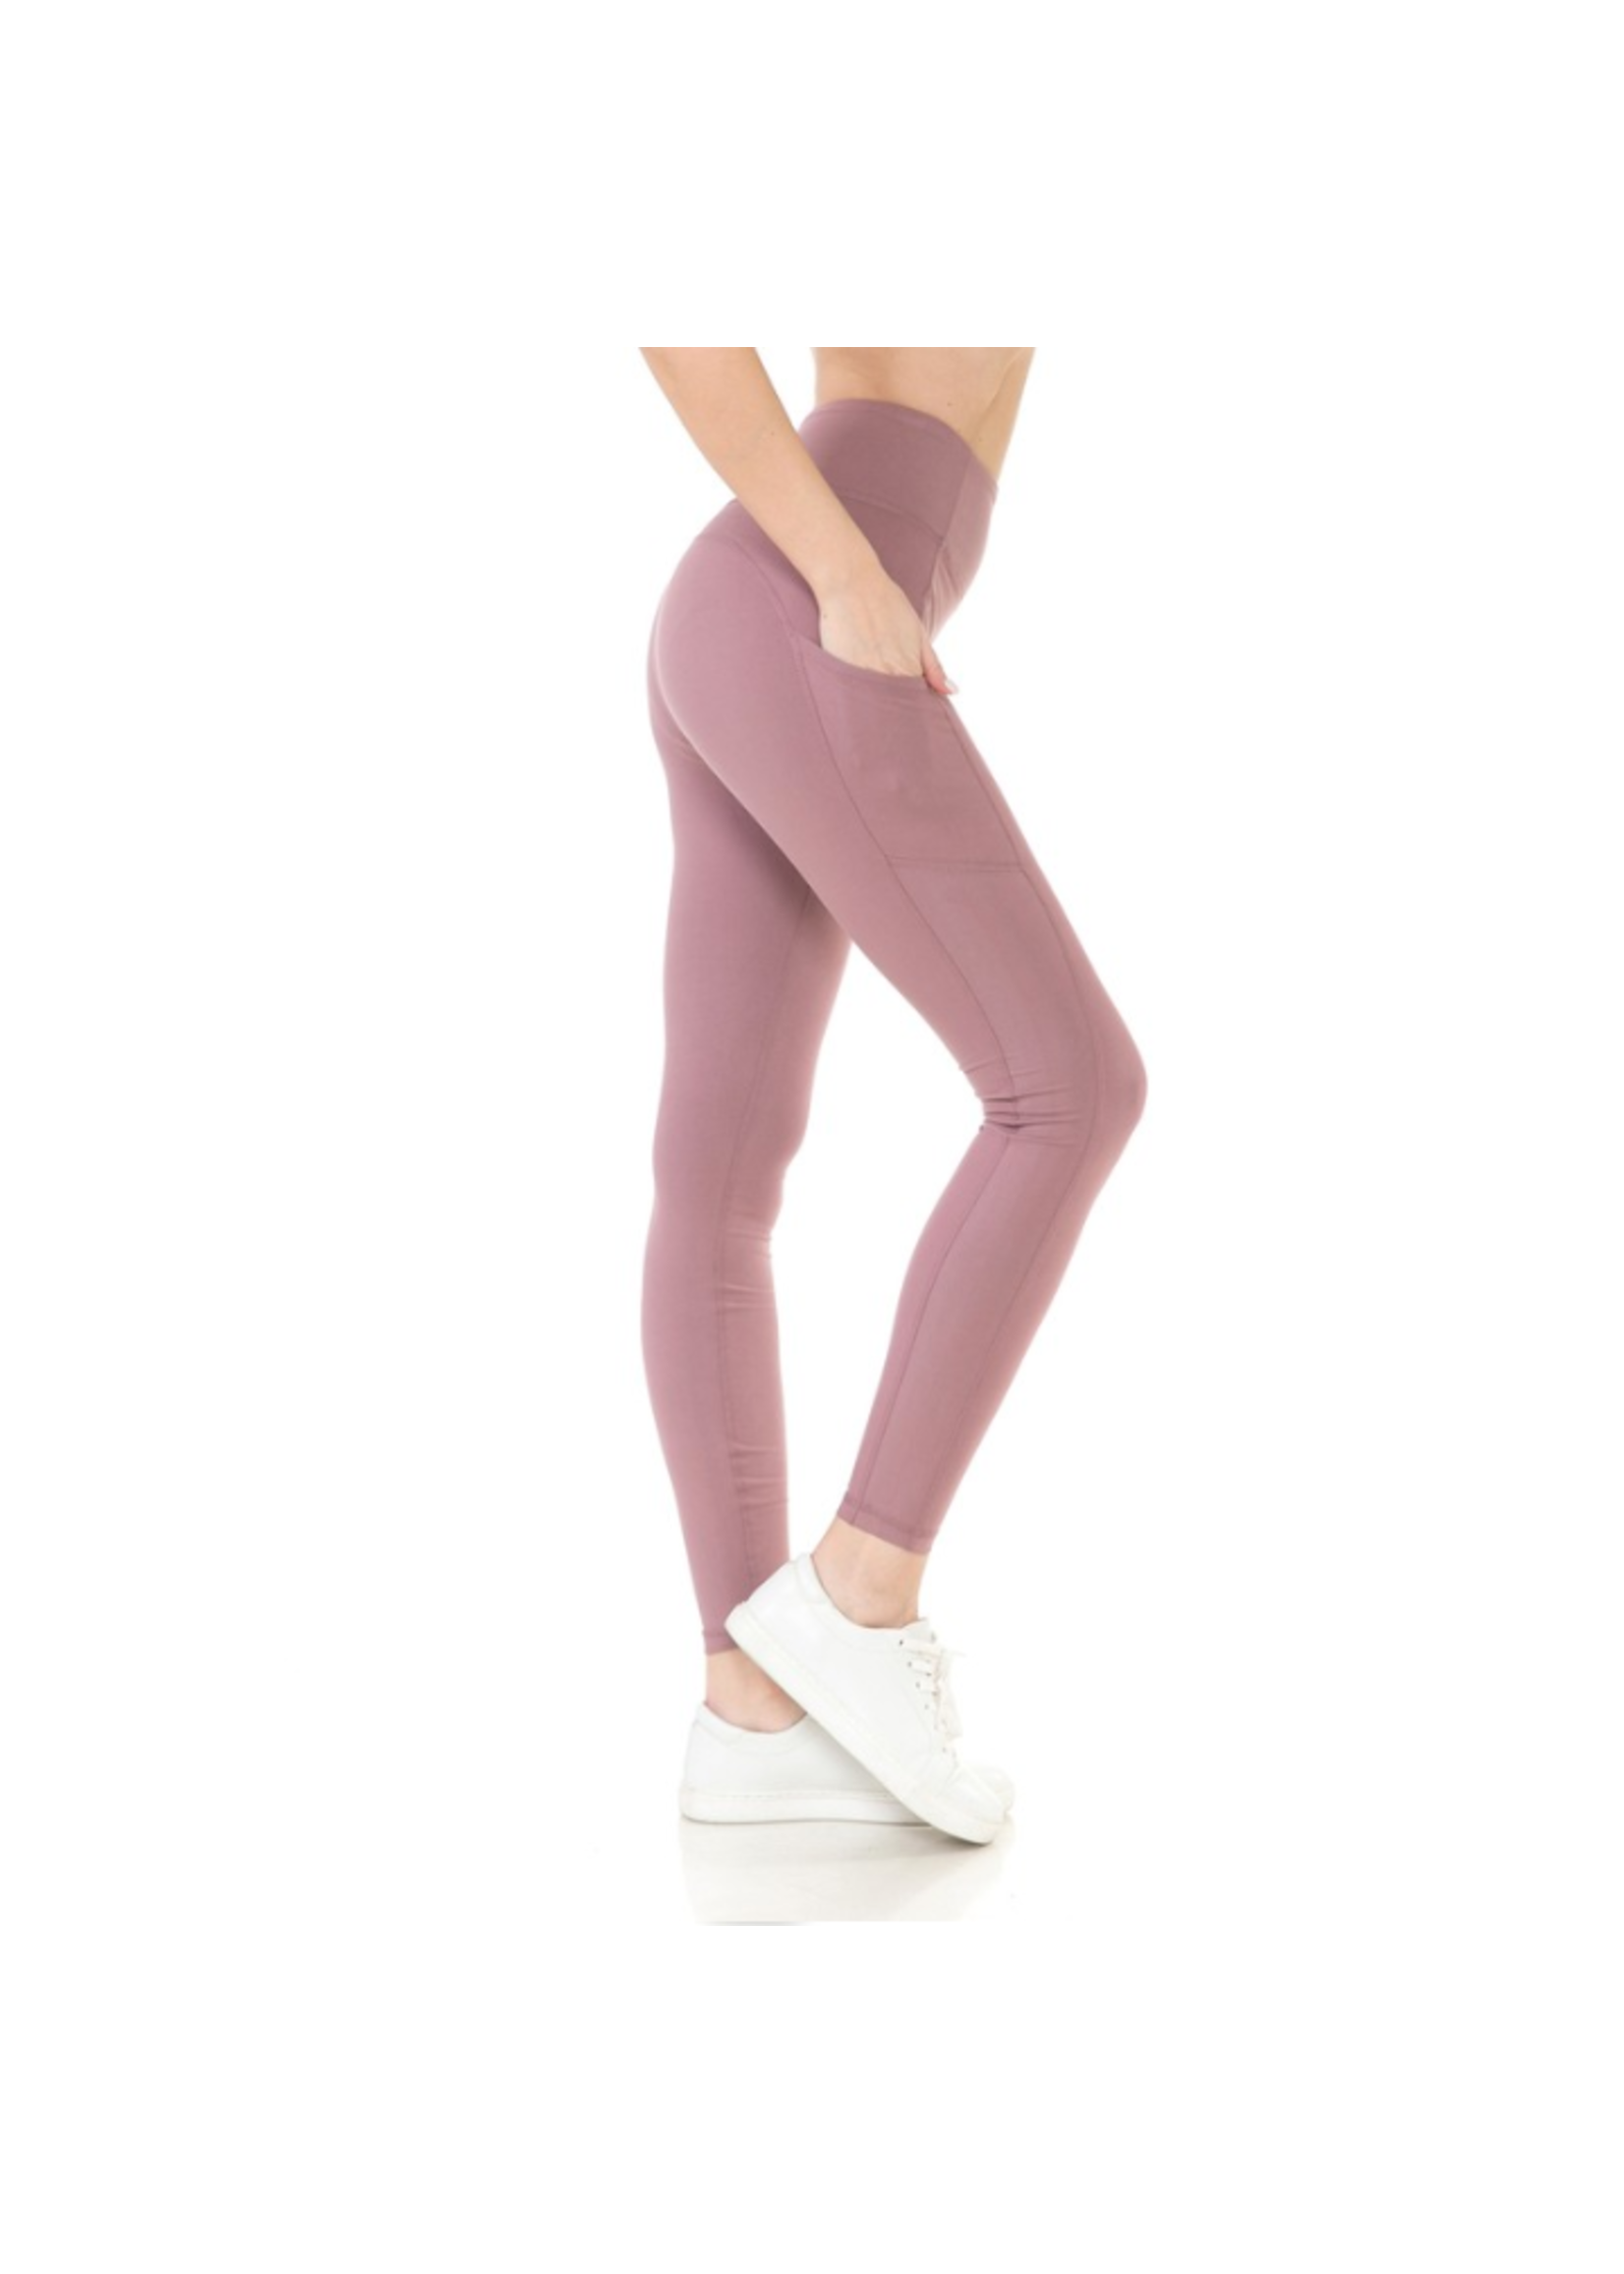 Valentines Day Love Heart Candy Sweet Leggings, Zazzle